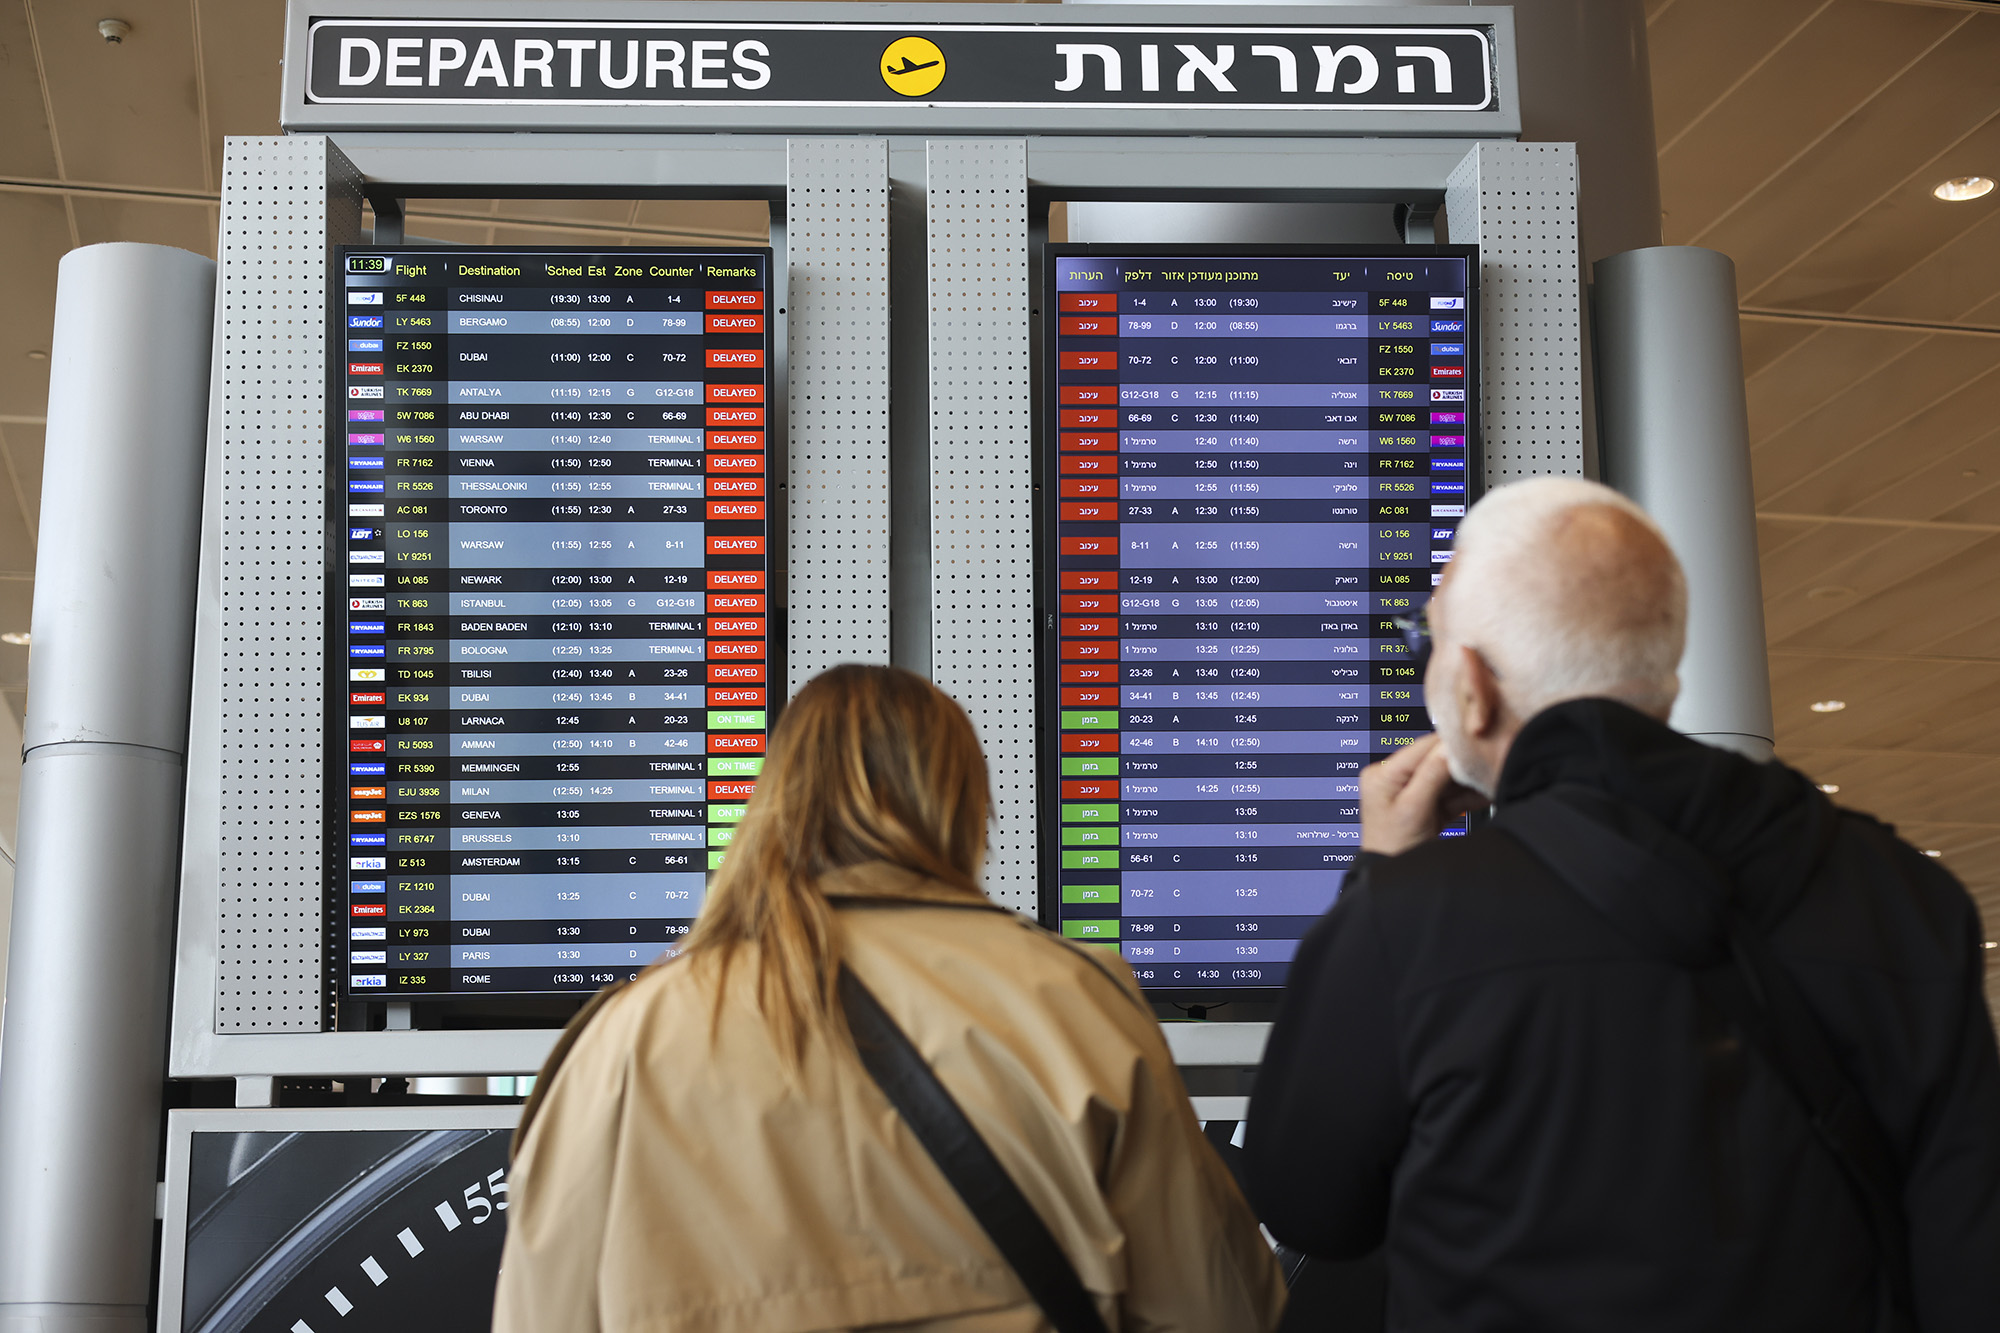 Passengers look at the monitor displaying delayed flights at Ben Gurion airport, near Tel Aviv, Israel, on March 27.